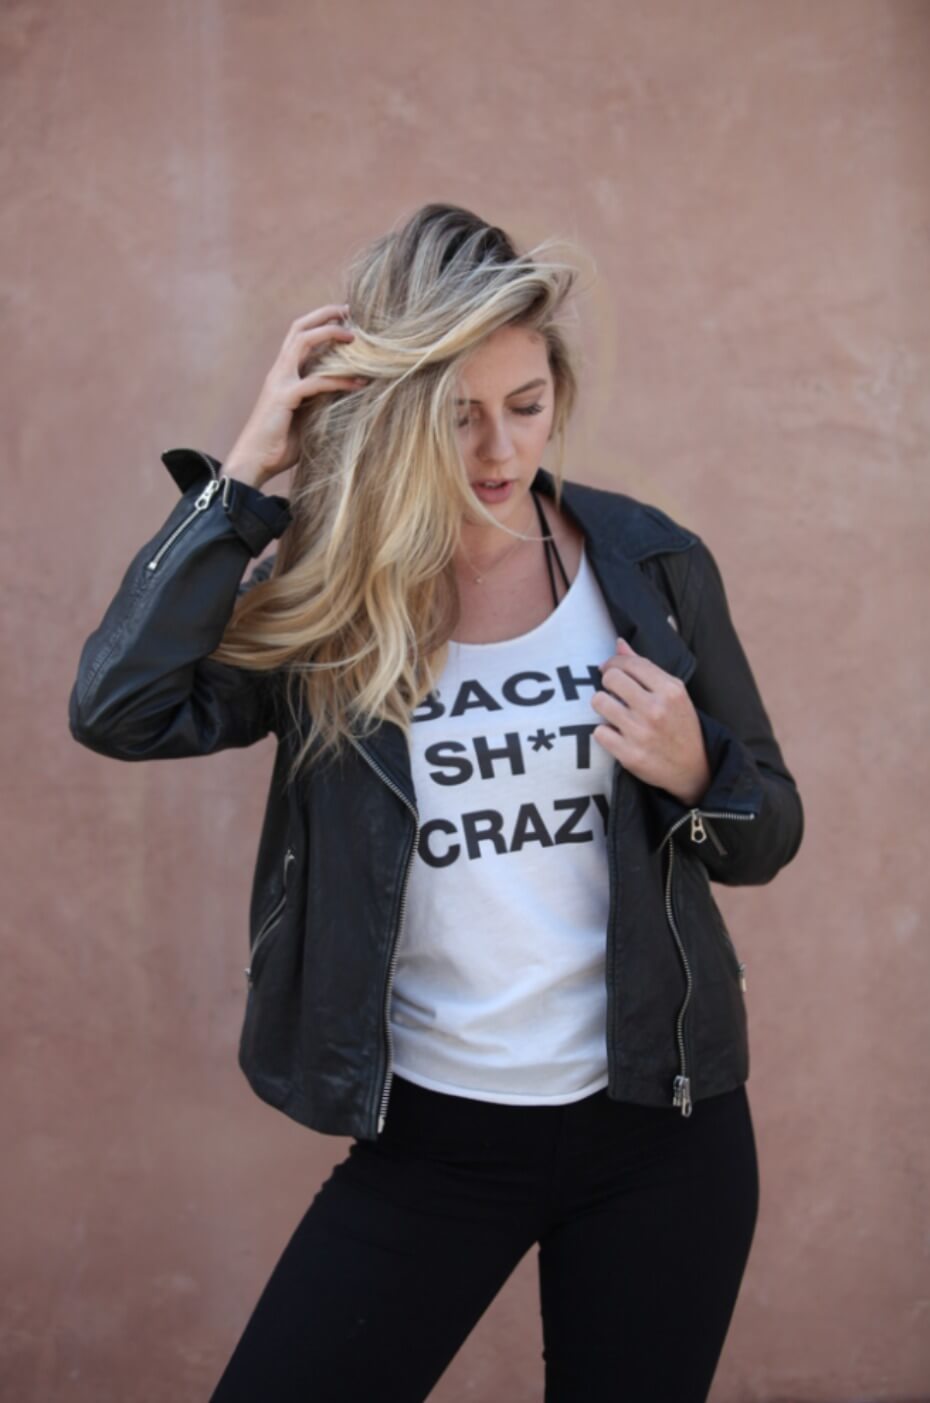 Bach Shit Crazy Bridal Party Tank from Wedding Chicks Shop